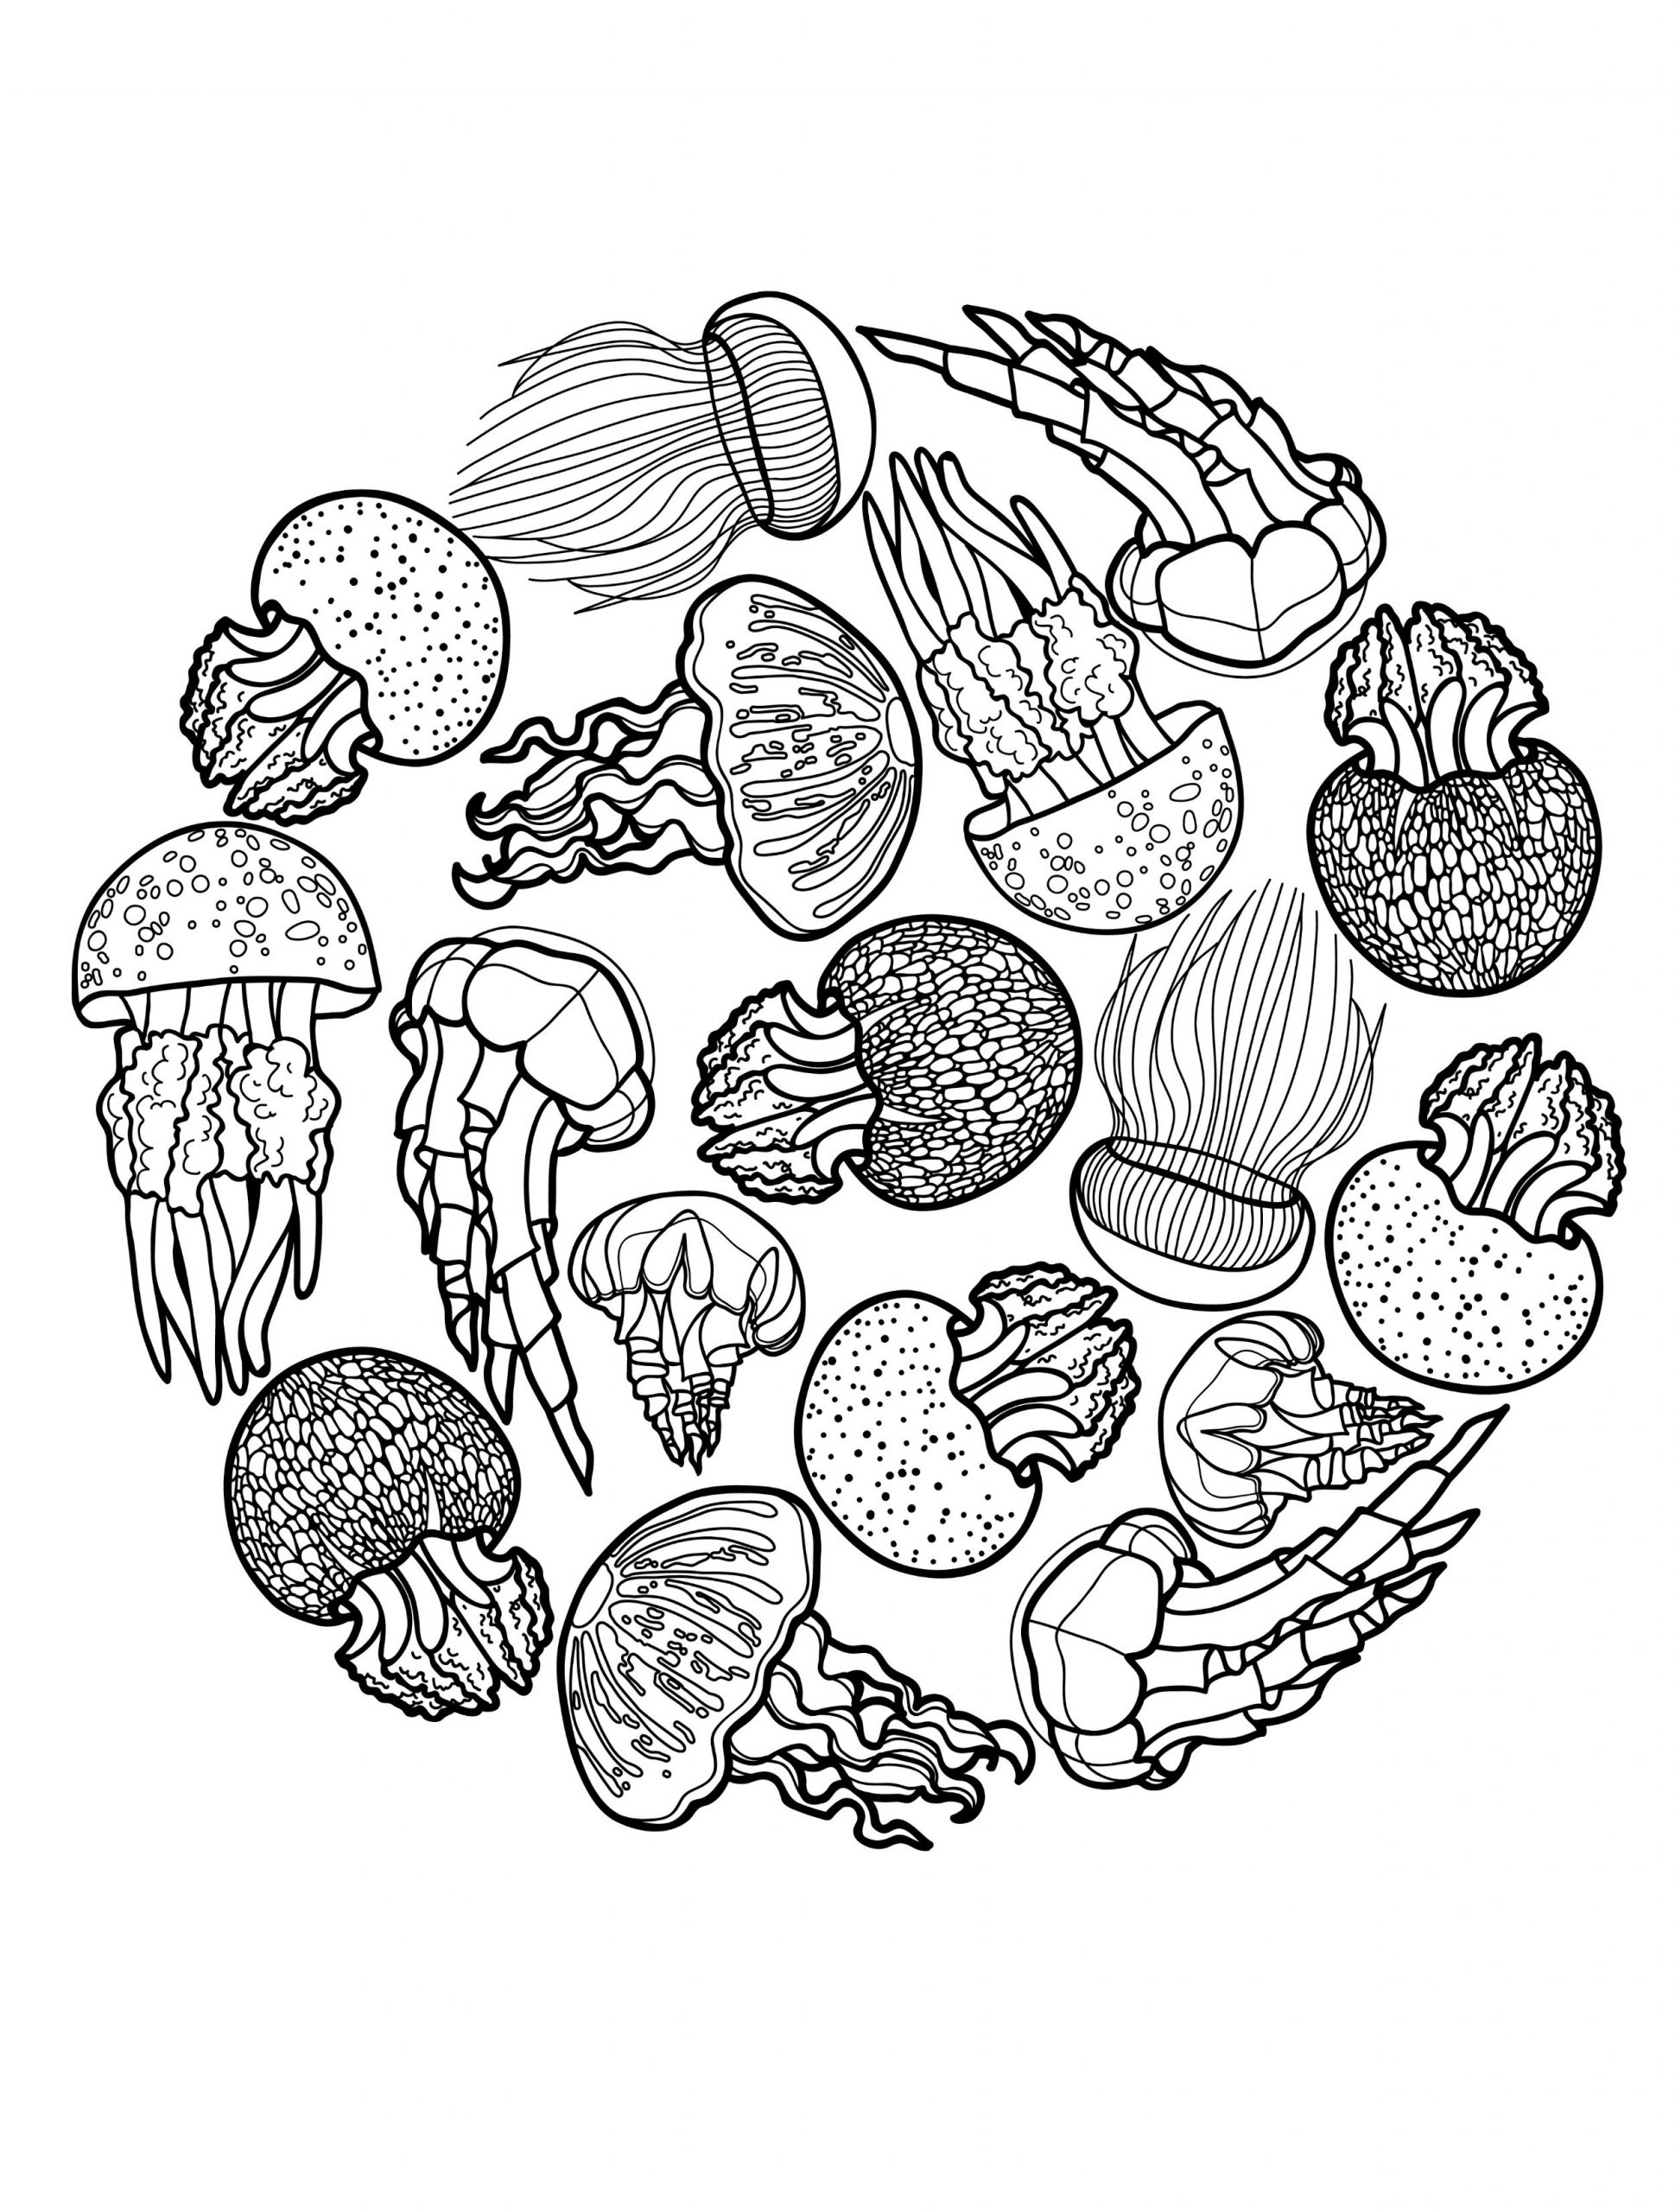 Jellyfish Coloring Pages For Adults
 Wacky Wednesday Coloring Pages at GetColorings